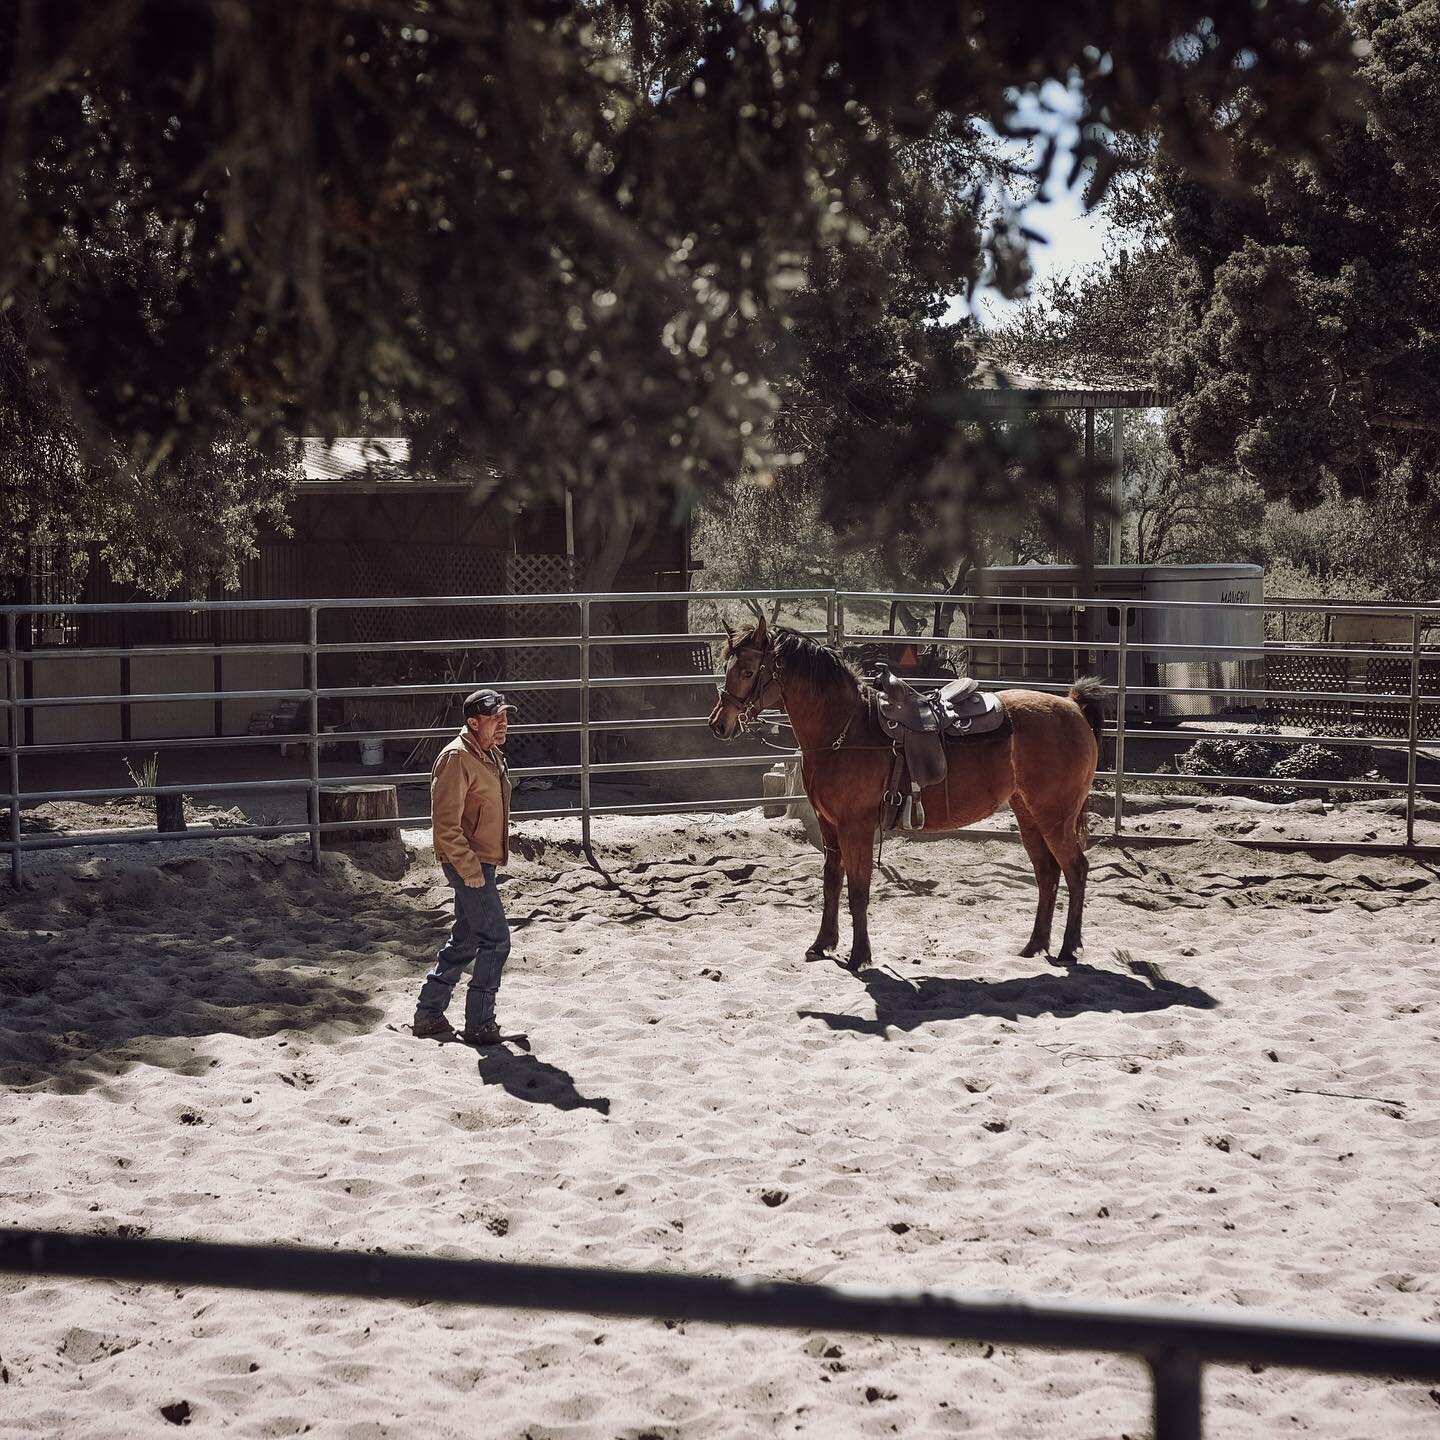 &ldquo;Live in the #present, launch yourself on every wave, find eternity in each #moment.&rdquo; - Henry David Thoreau #horsetrainer #horsemanship #horsesofinstagram #arabianhorse #horse #ranchlife #slohorses #visitslo #slocal #visitcalifornia #hors